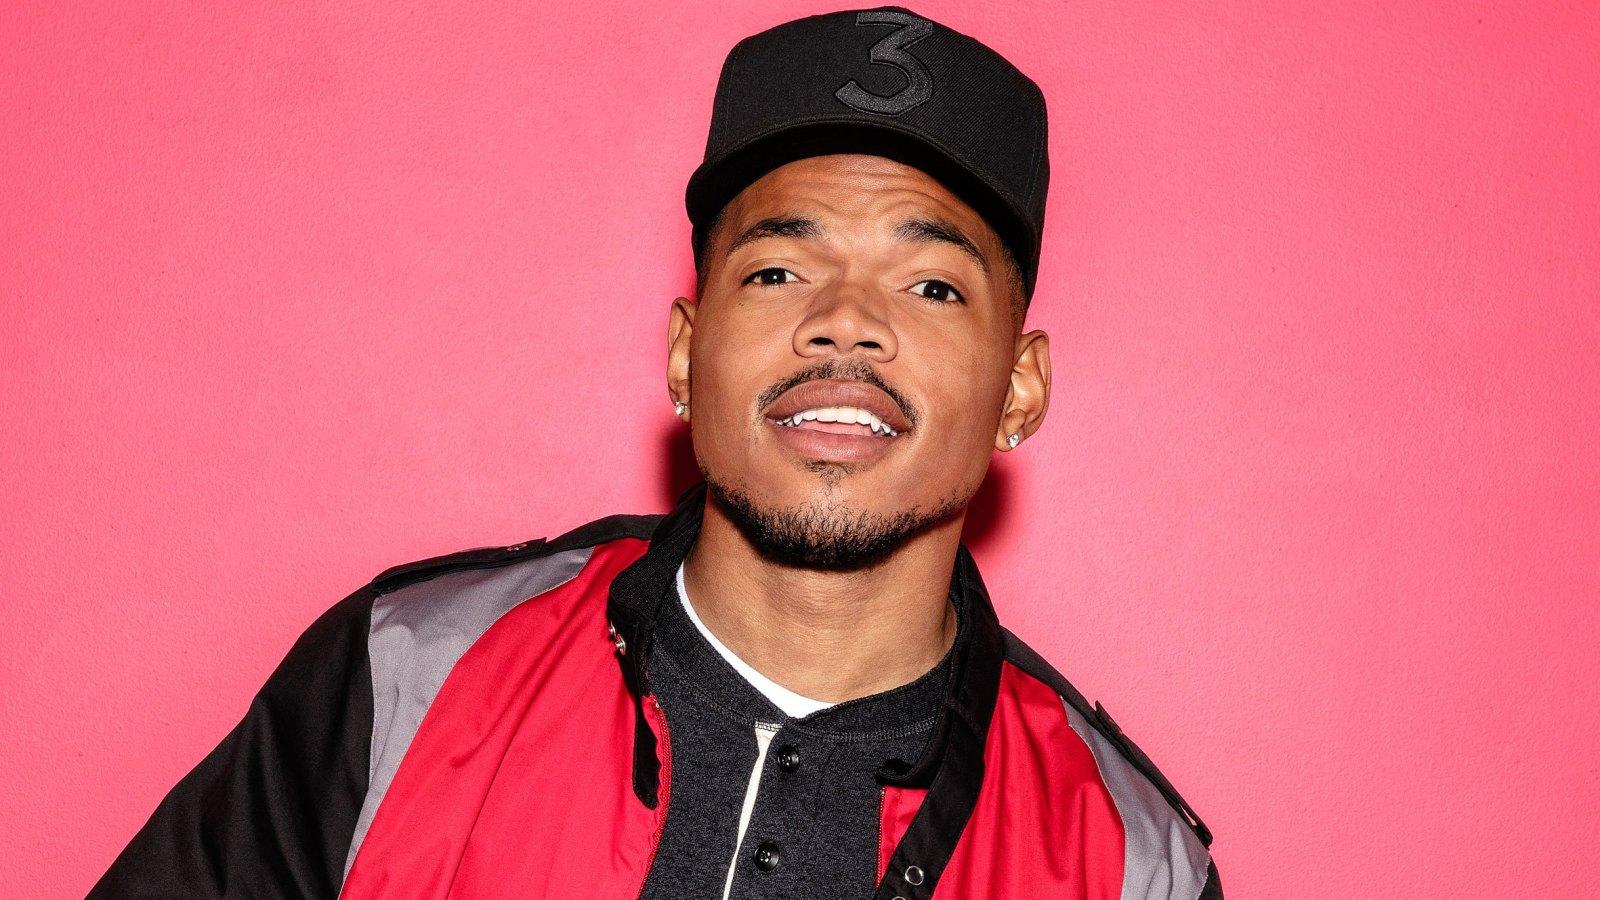 Chance The Rapper Previews Track List For Debut Album. HipHop N More